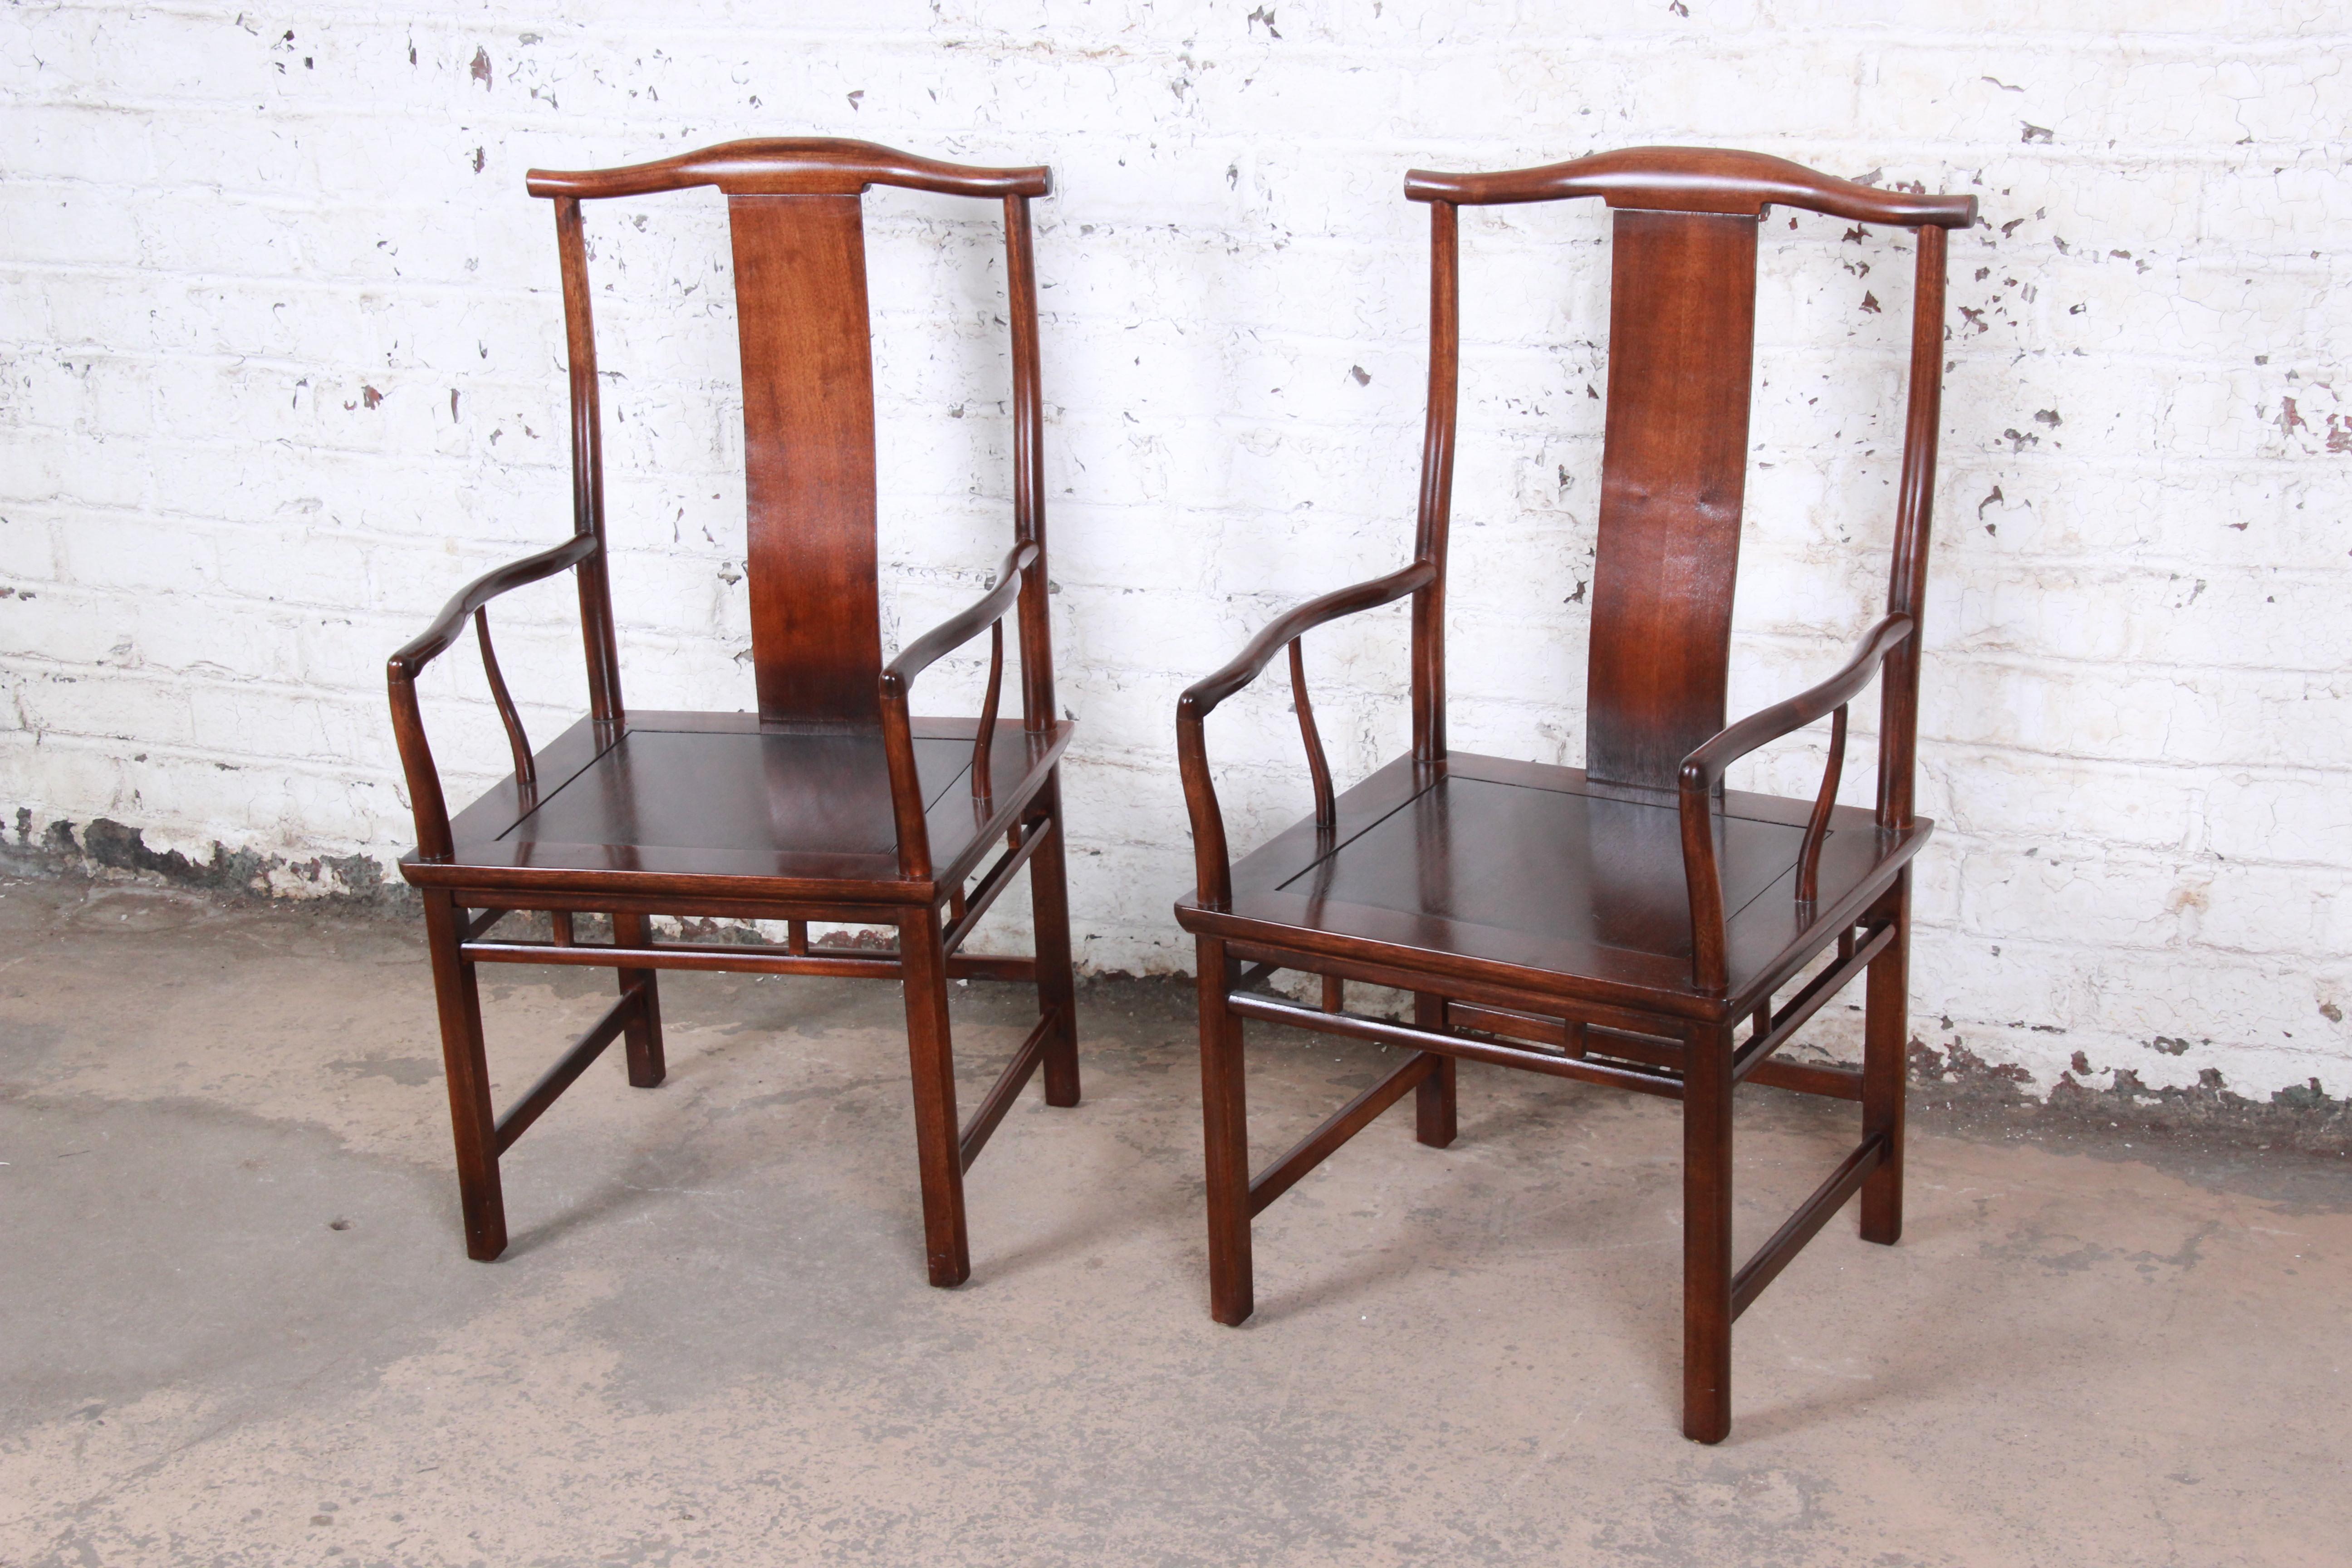 An exceptional pair of Mid-Century Modern Chinese official's yoke back chairs. Excellent for club chairs or dining captain chairs.

Designed by Michael Taylor for his Far East Collection for Baker Furniture

USA, circa 1950s

Solid walnut and